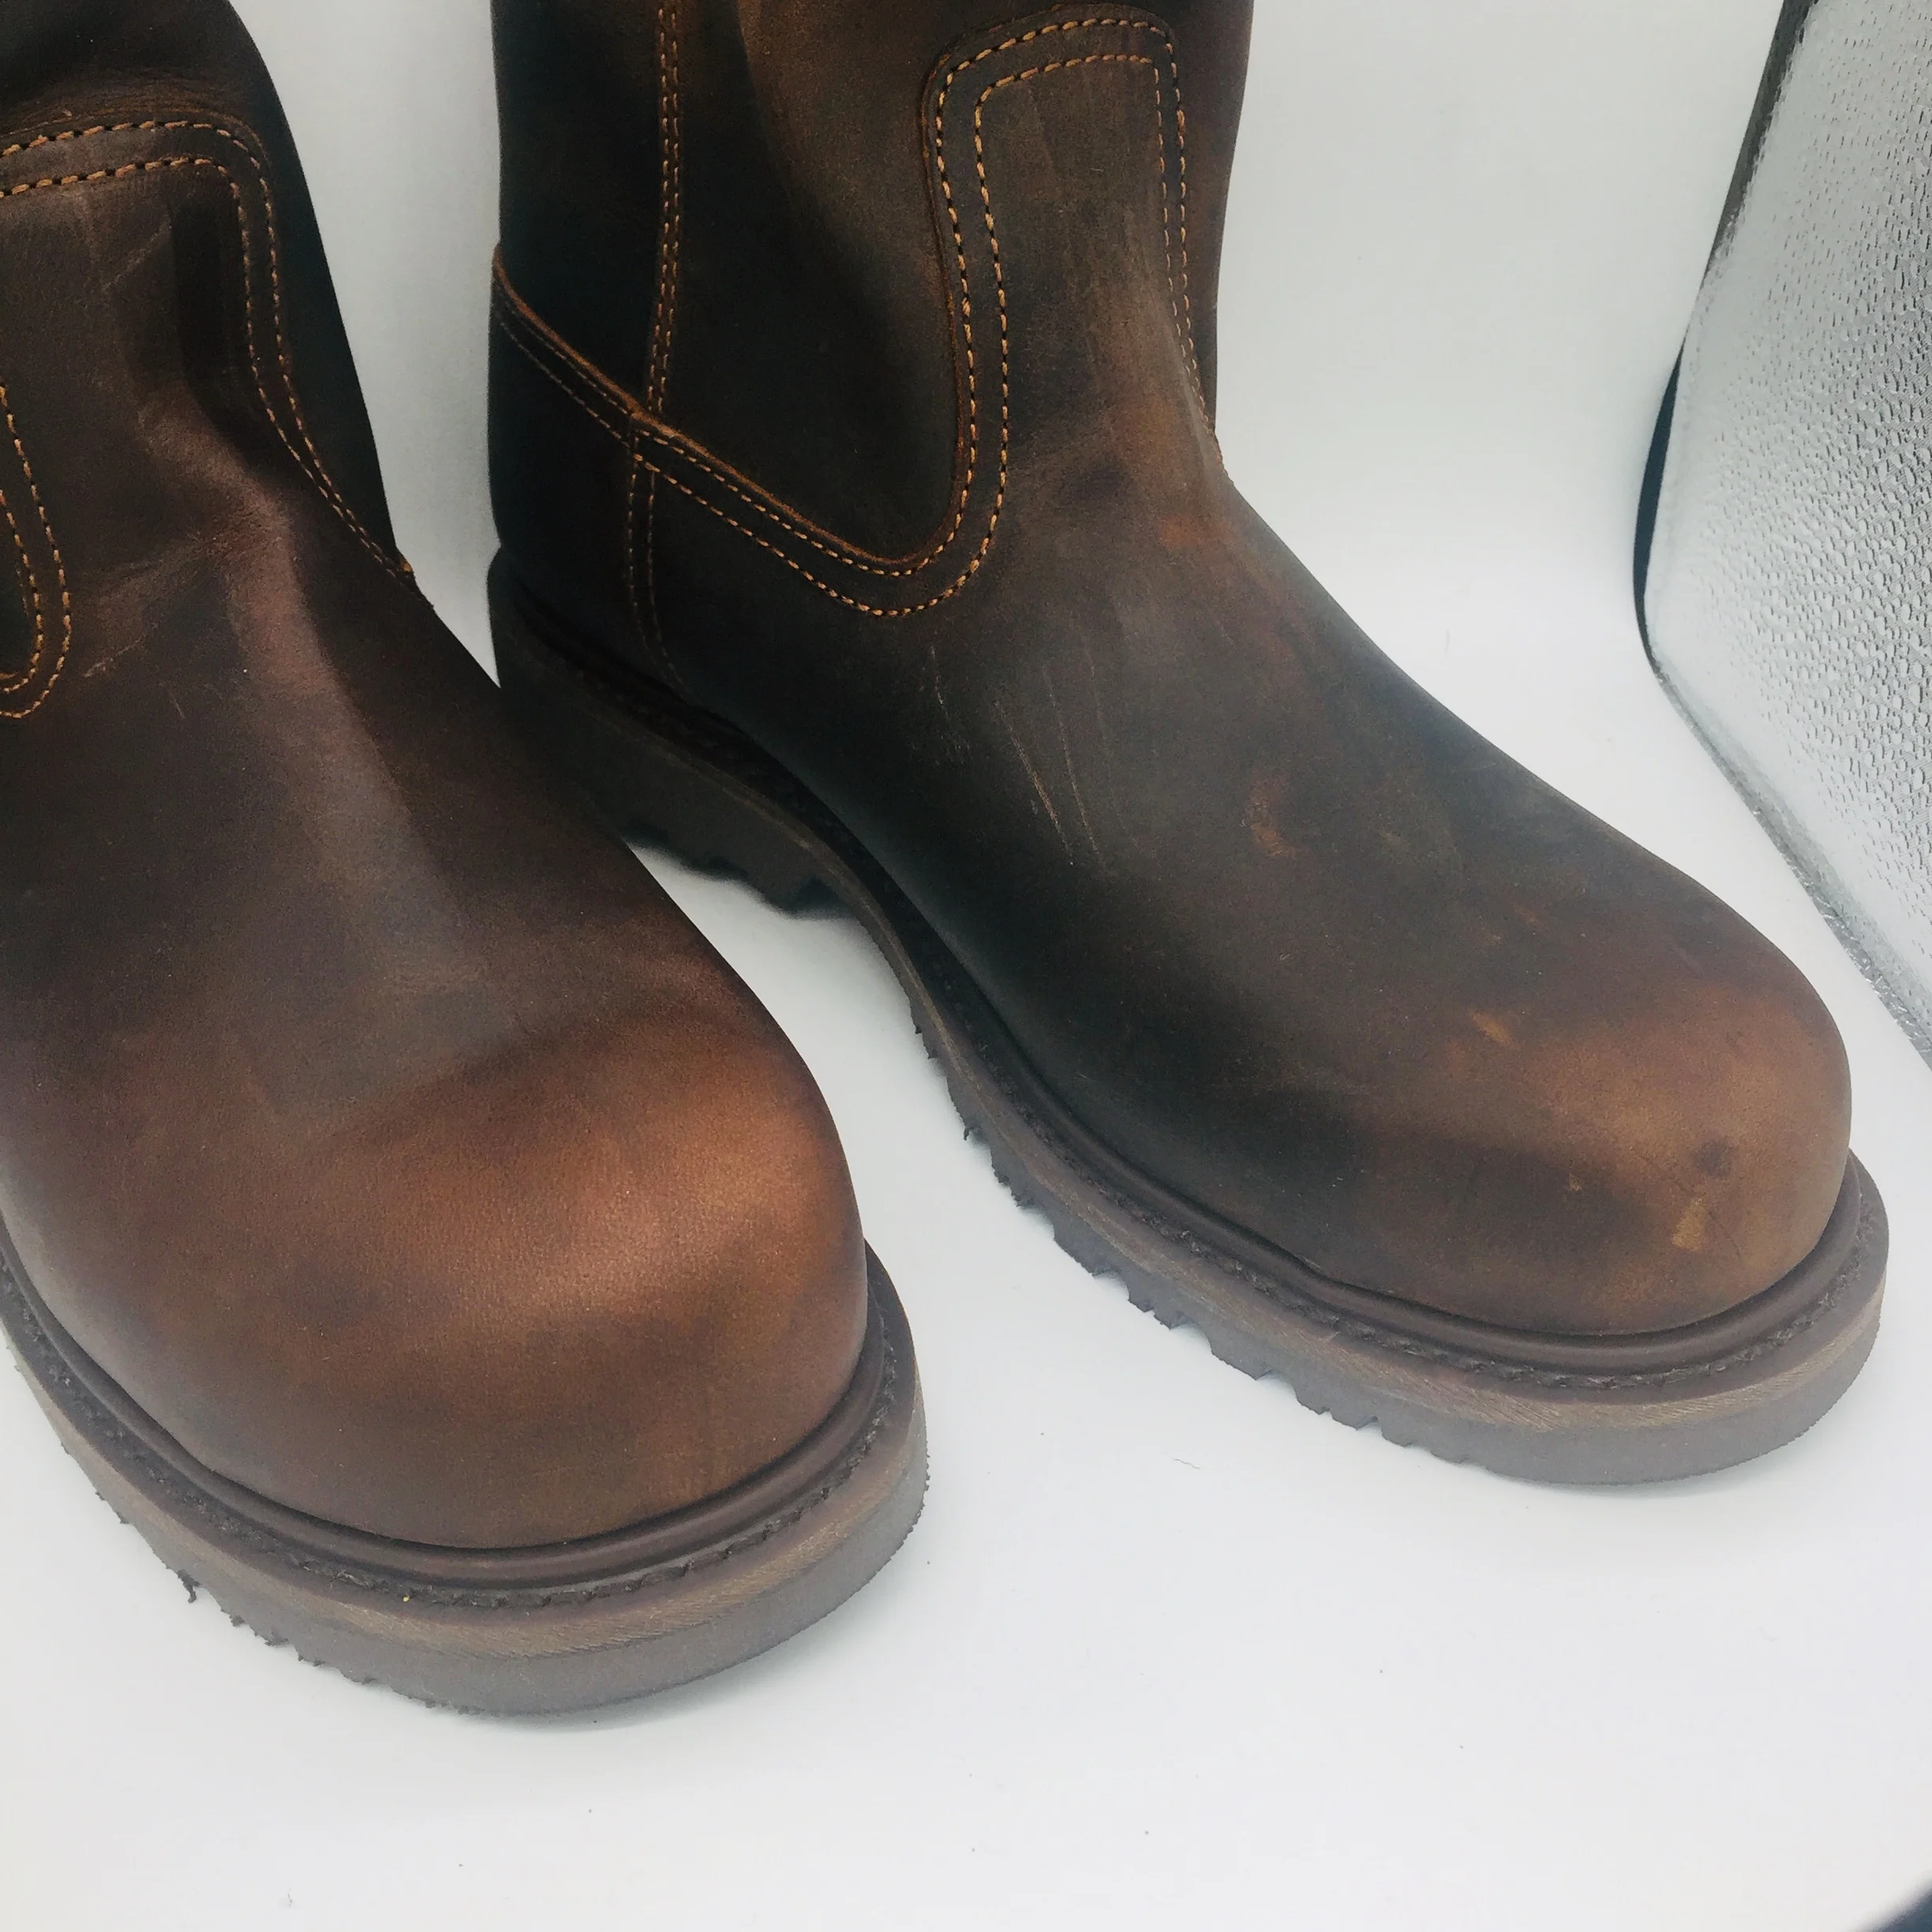 leather rigger boots